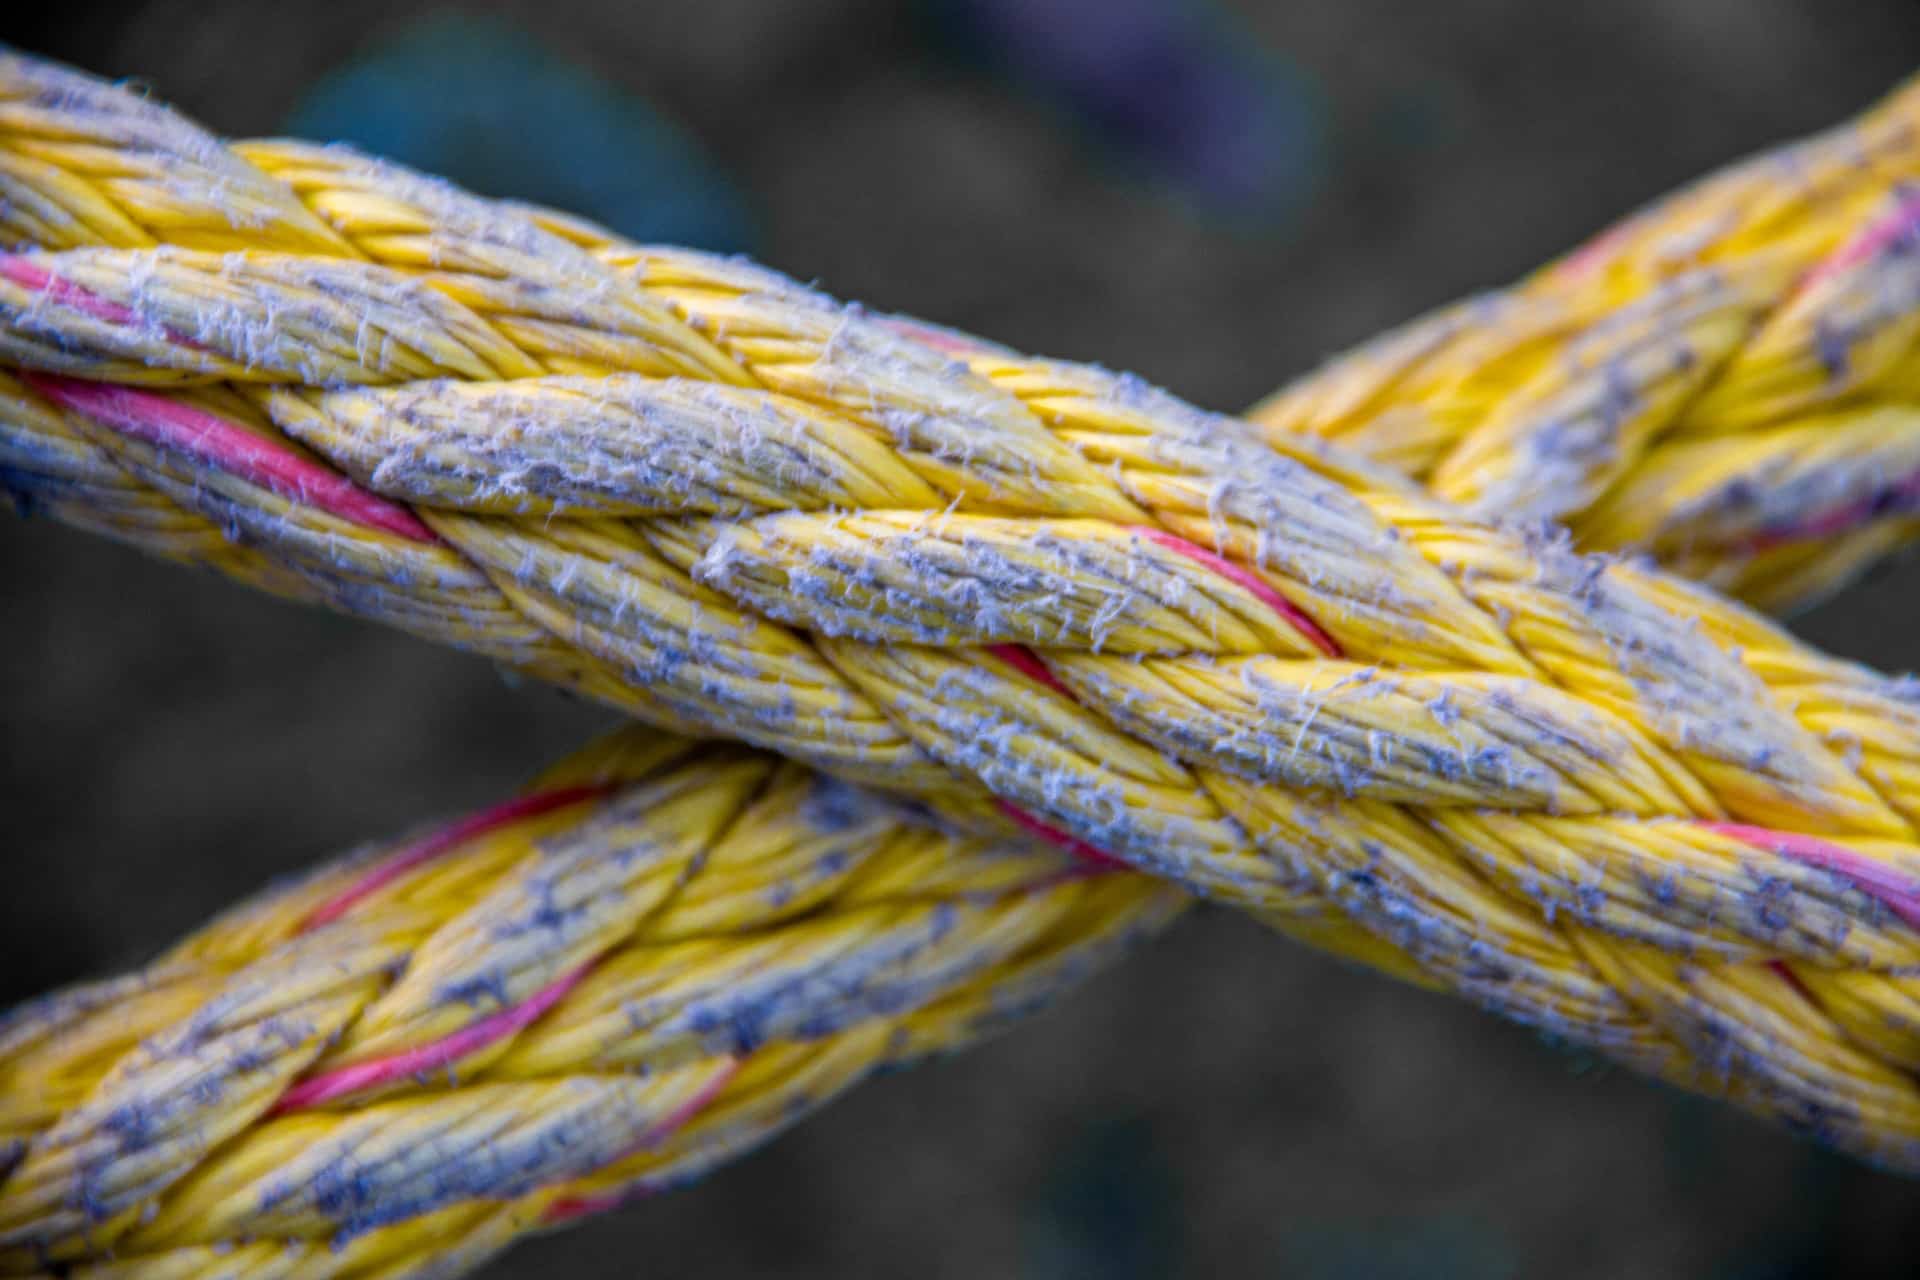 a close-up of a yellow and blue rope